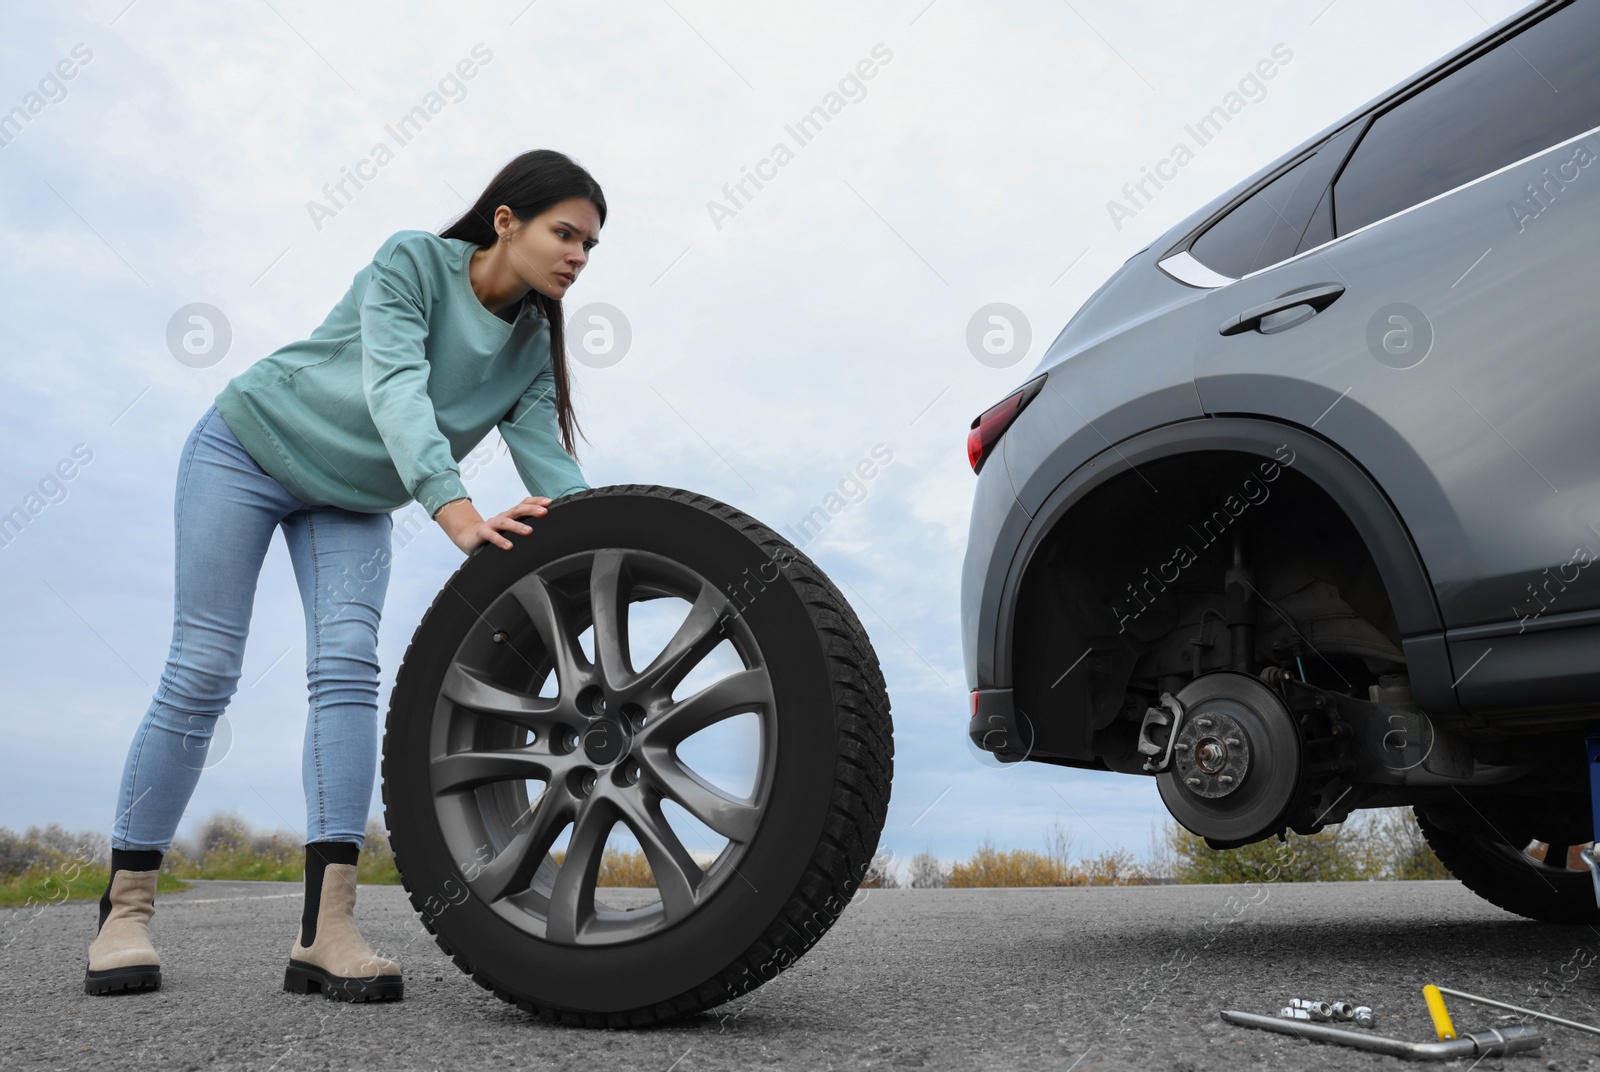 Photo of Young woman changing tire of car on roadside